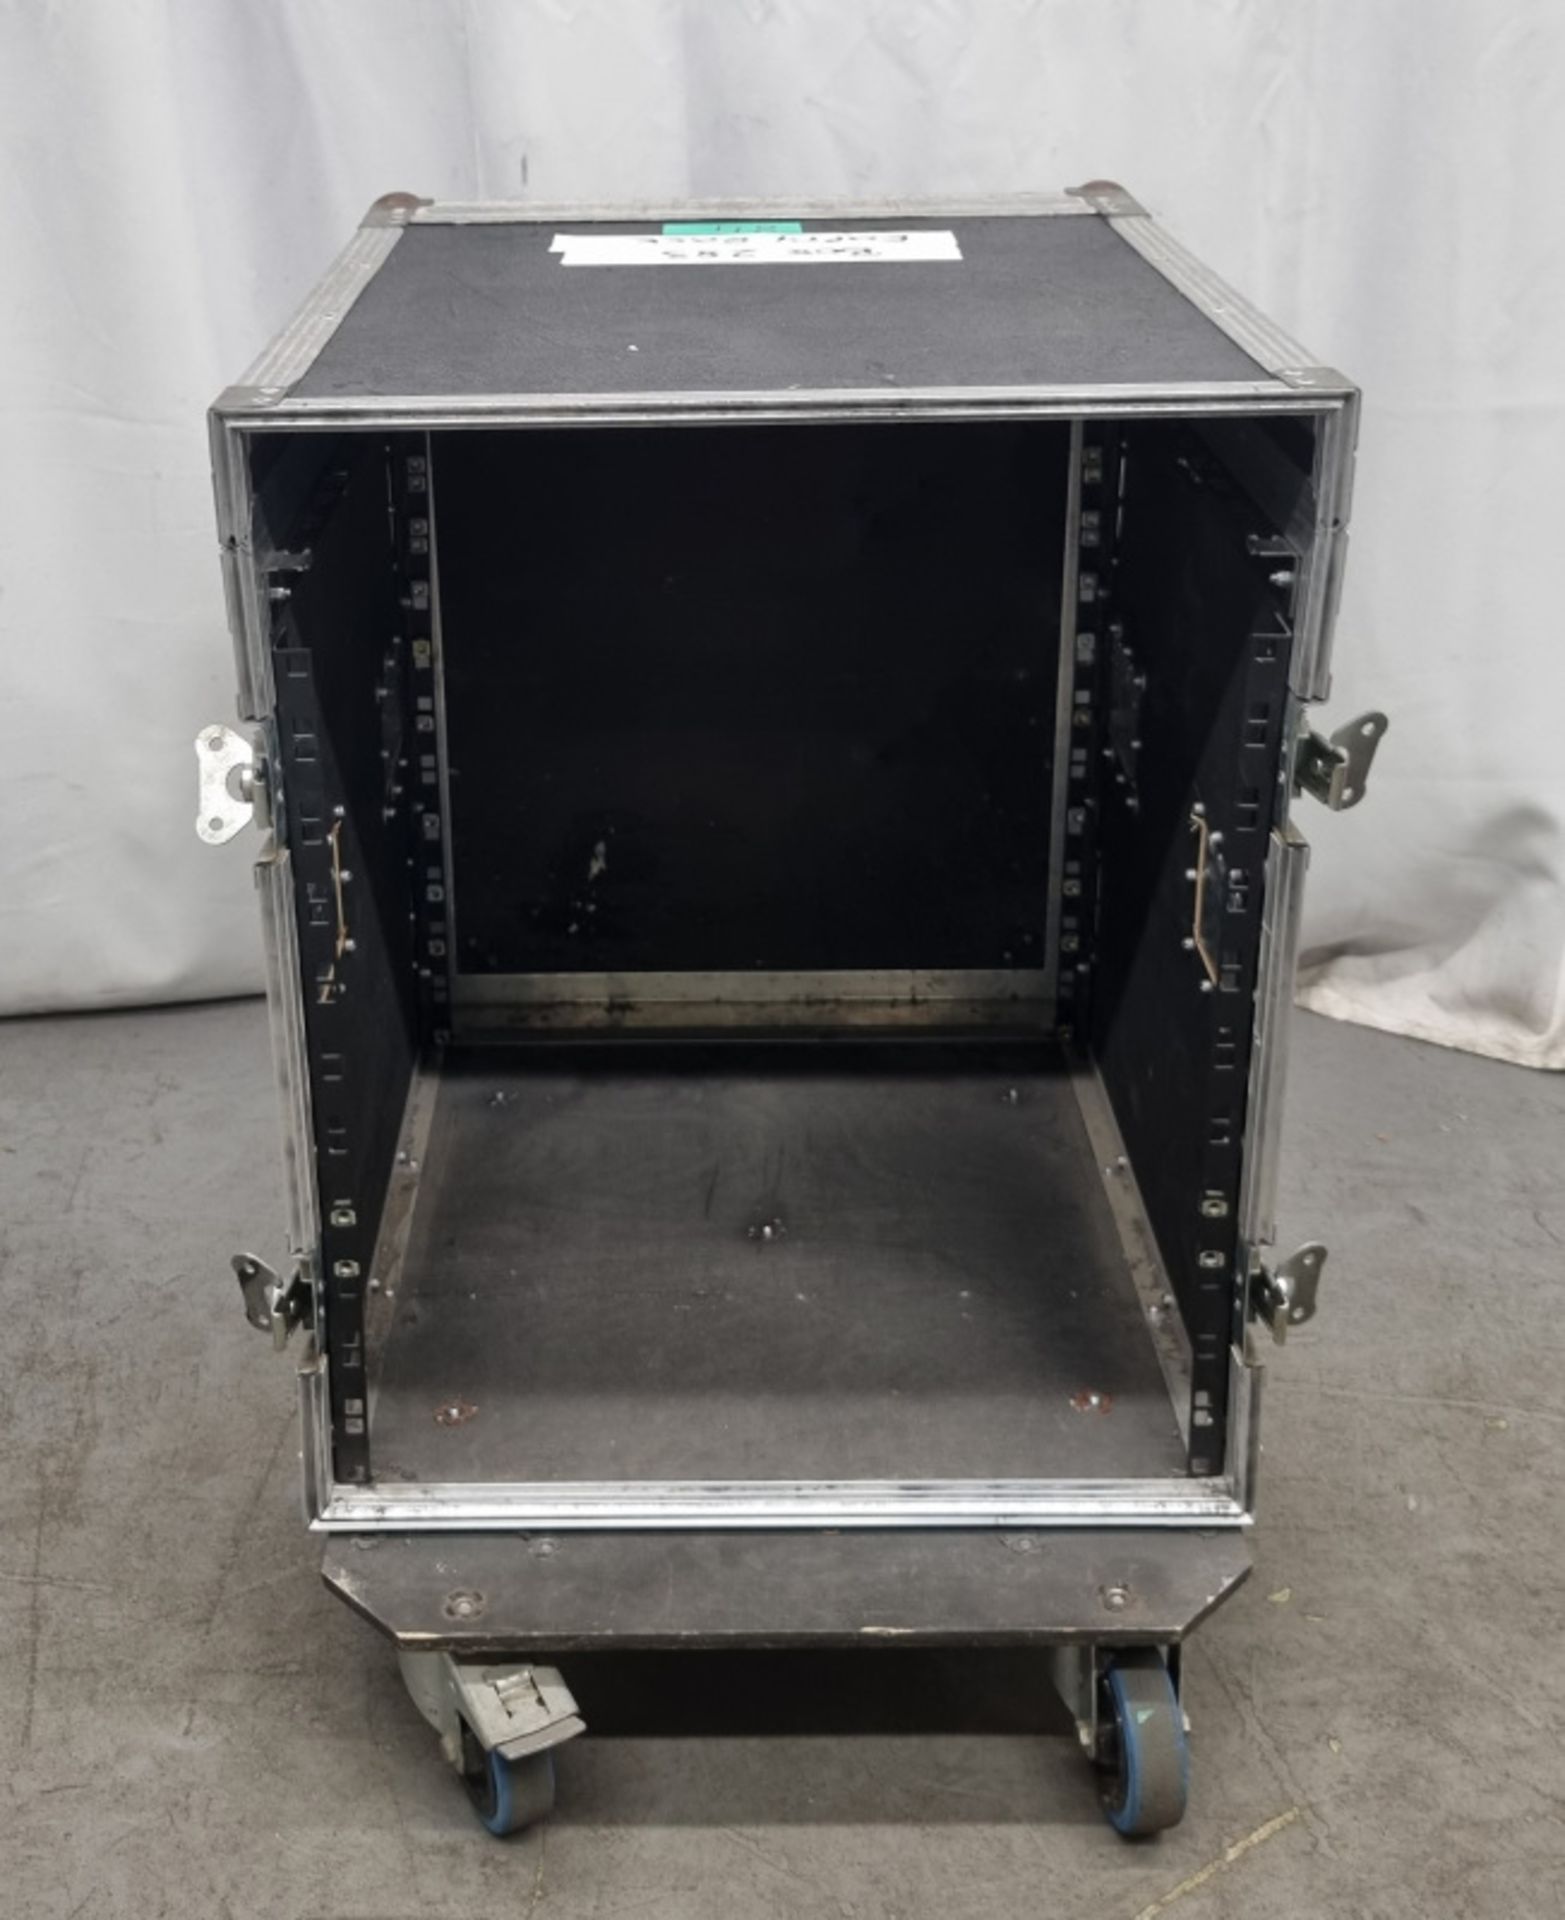 Empty Wheeled Flight case with internal rack - Dimensions L51.5 x W59 x H78 (including wheels) - Image 4 of 5